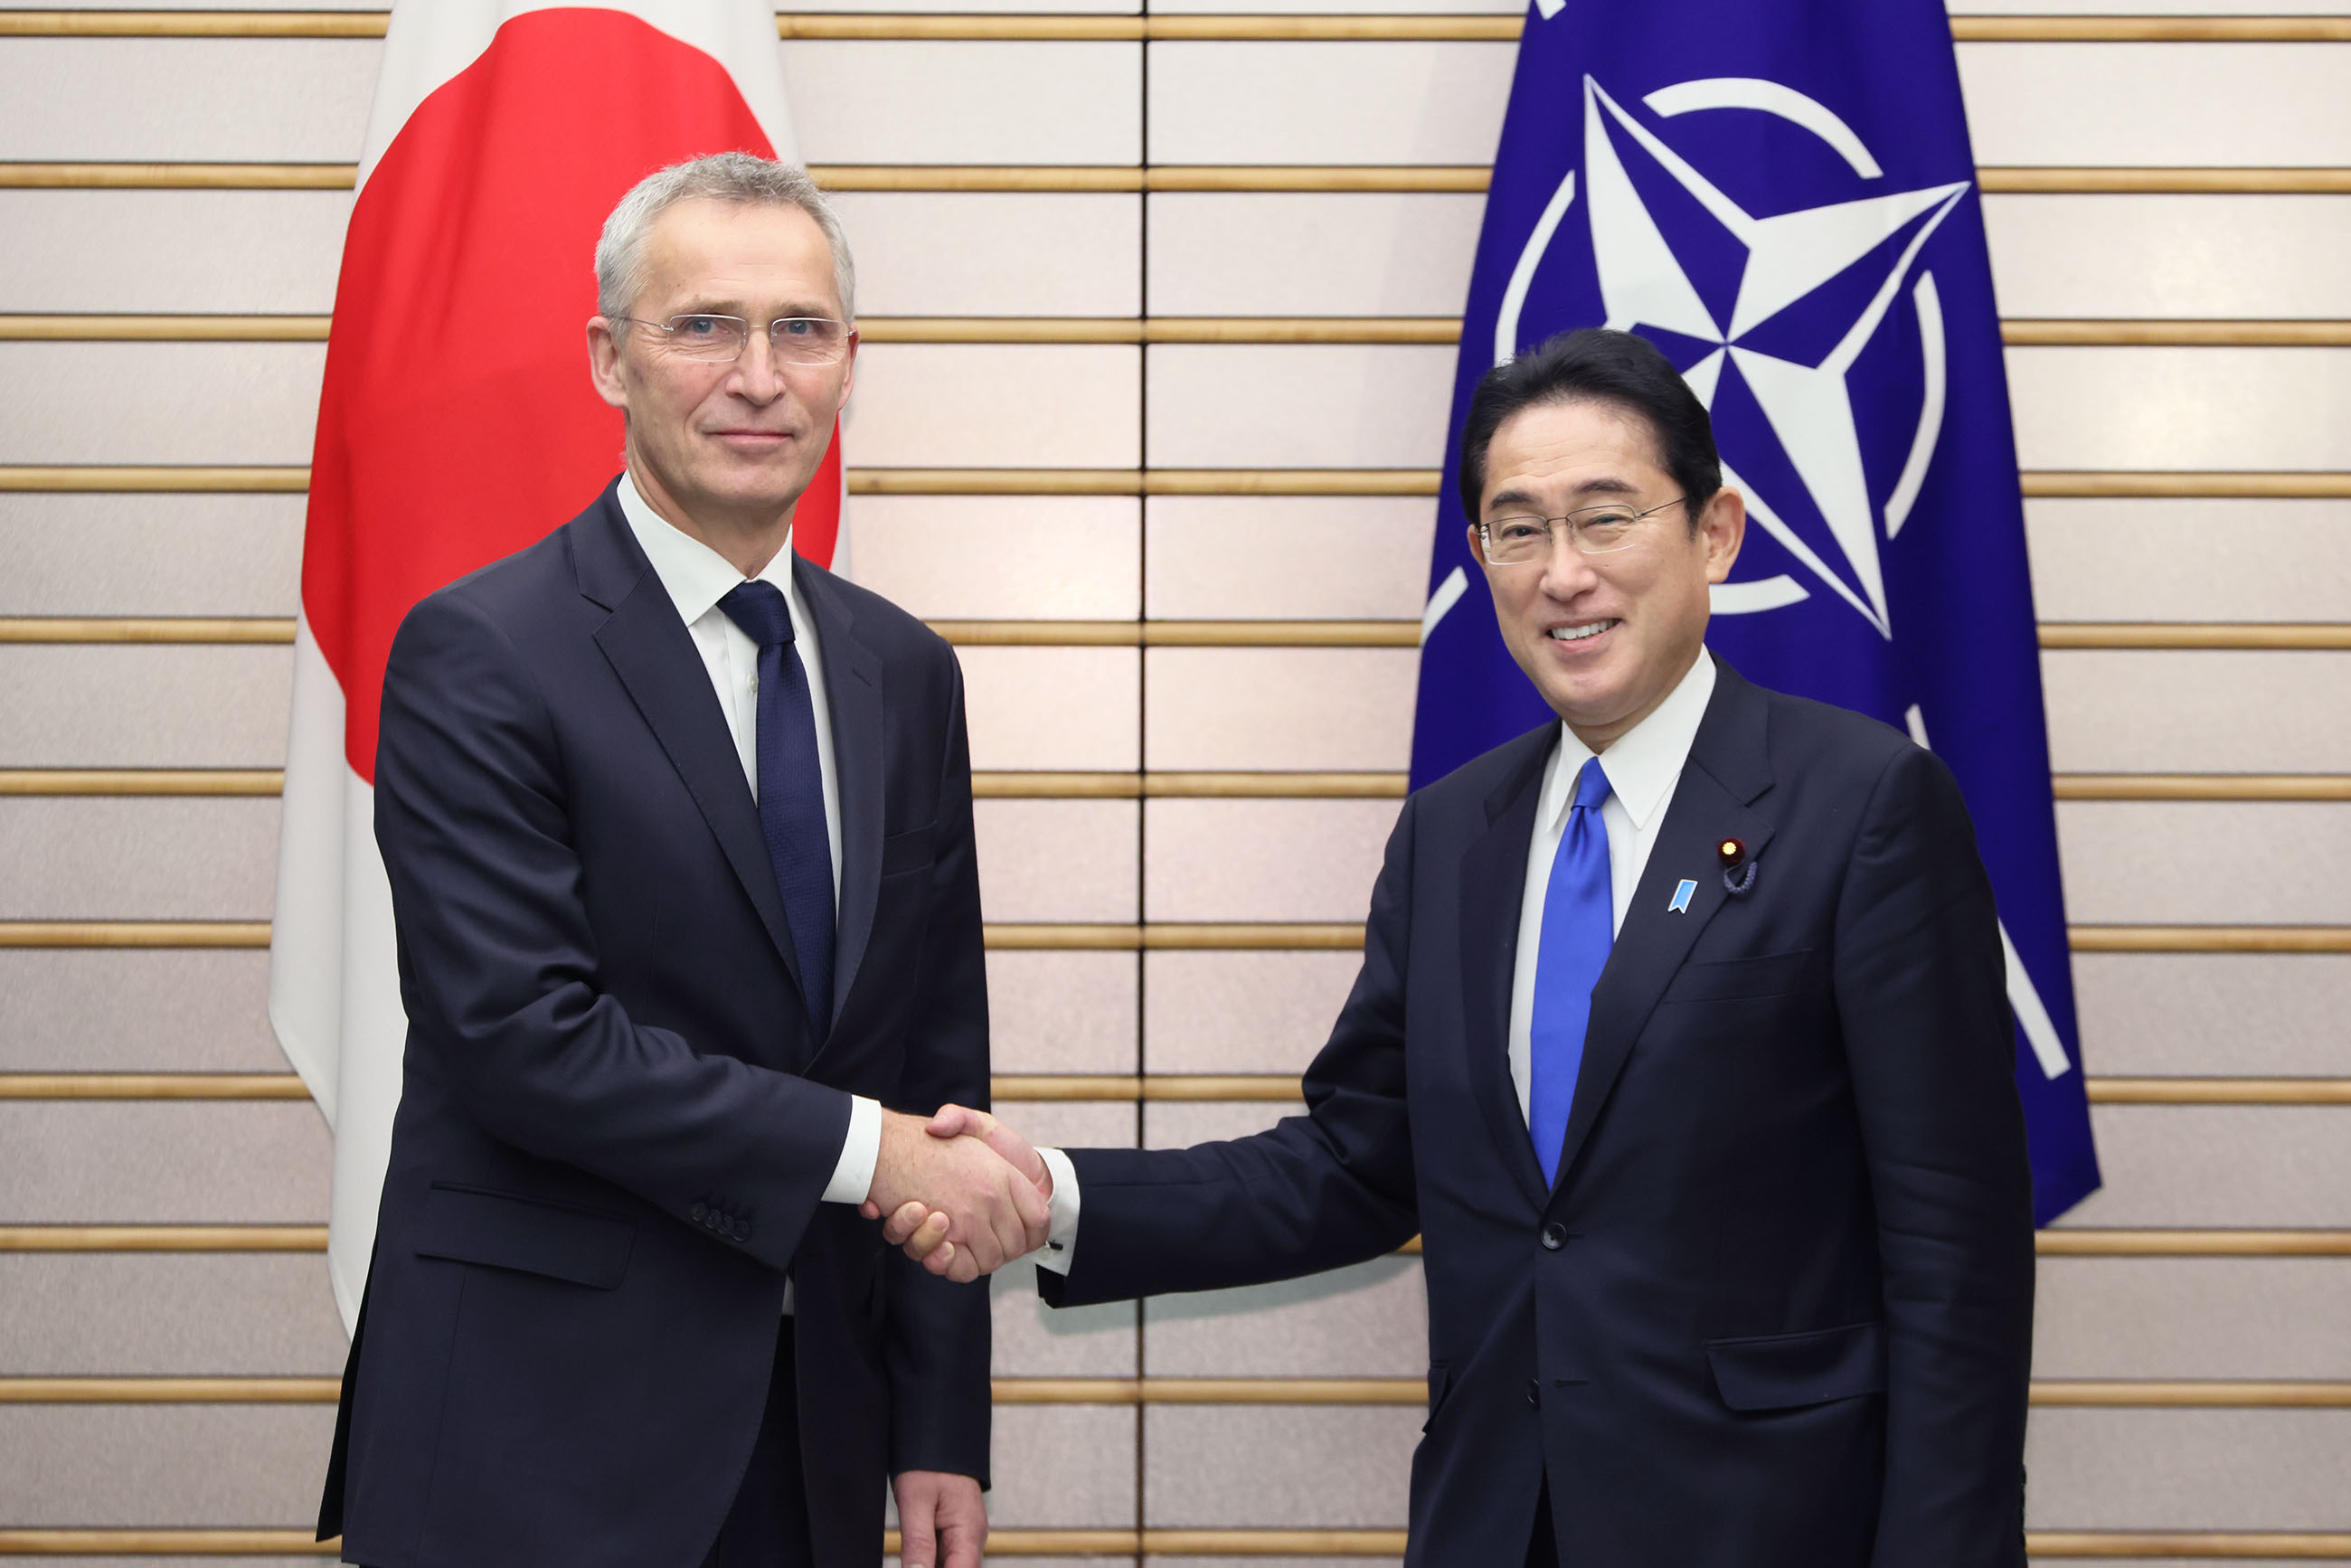 Meeting with NATO Secretary General Jens Stoltenberg and Other Events